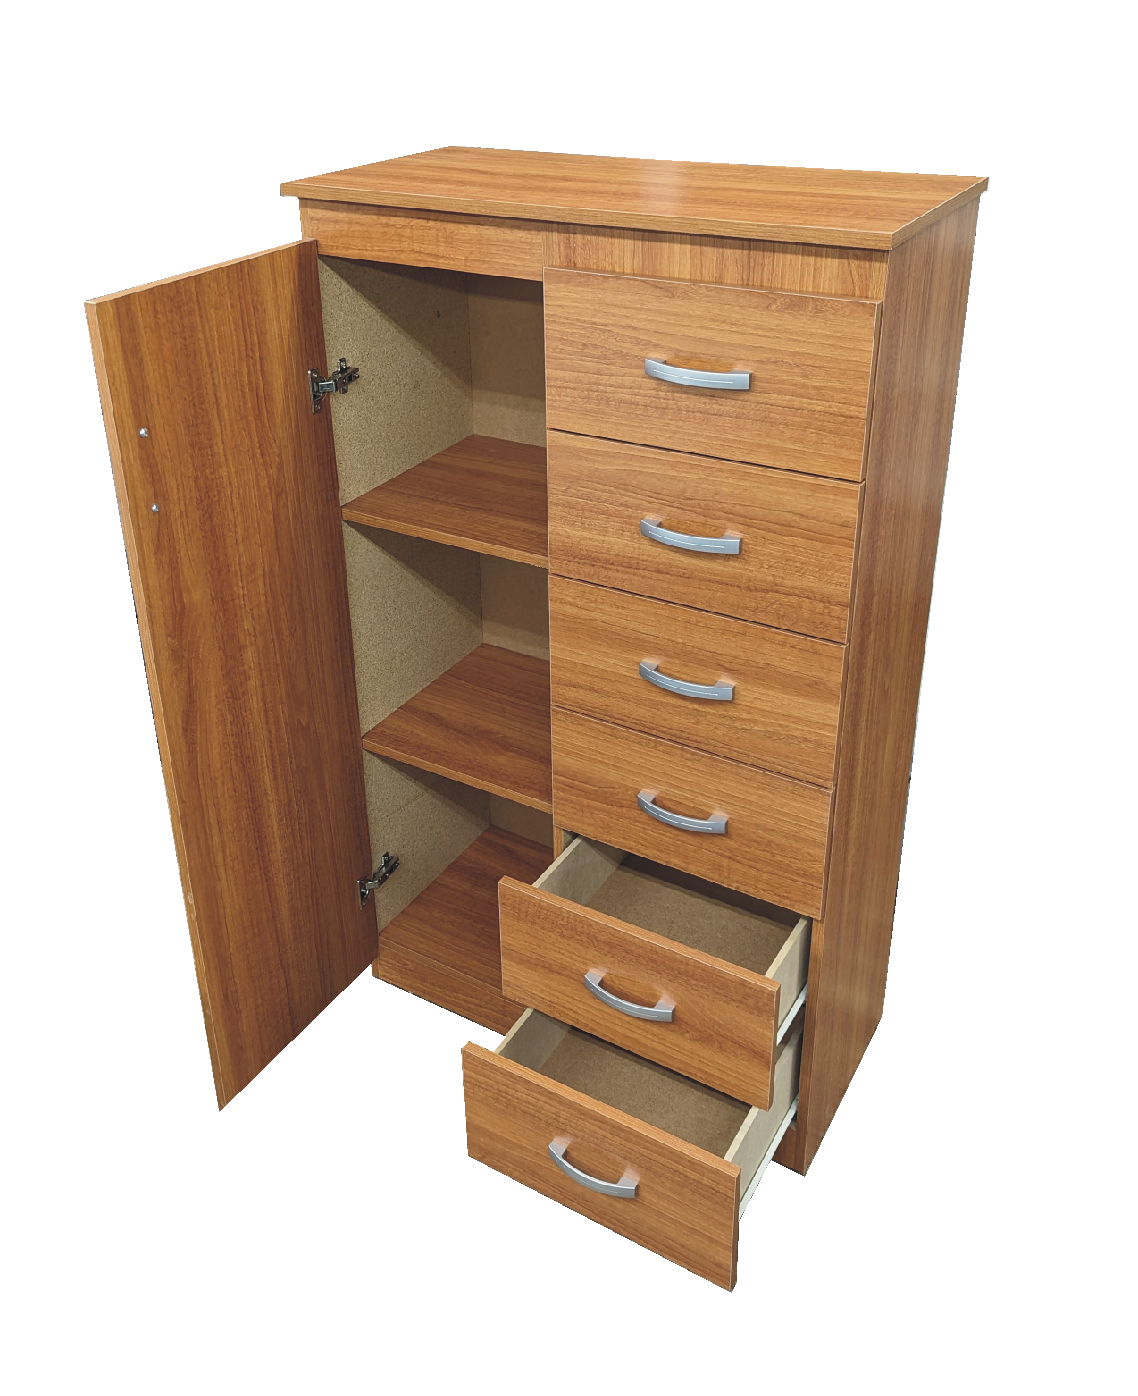 STR -168 Gentleman's Chest Storage Unit - Available in various colours